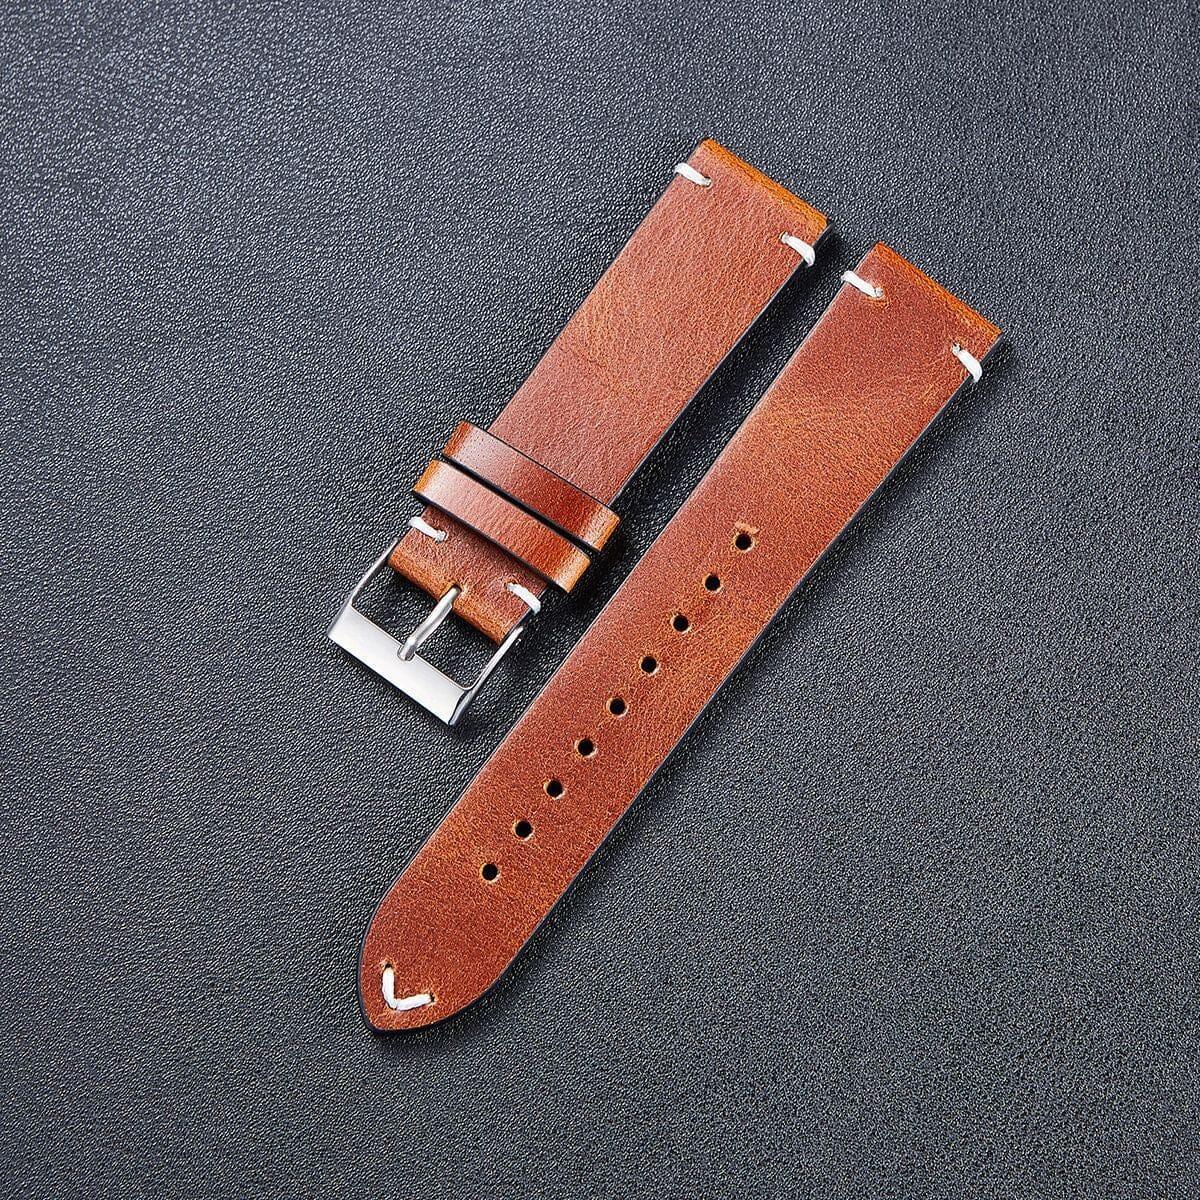 Vintage Oiled Leather Watch Straps Compatible with the Polar Vantage M2